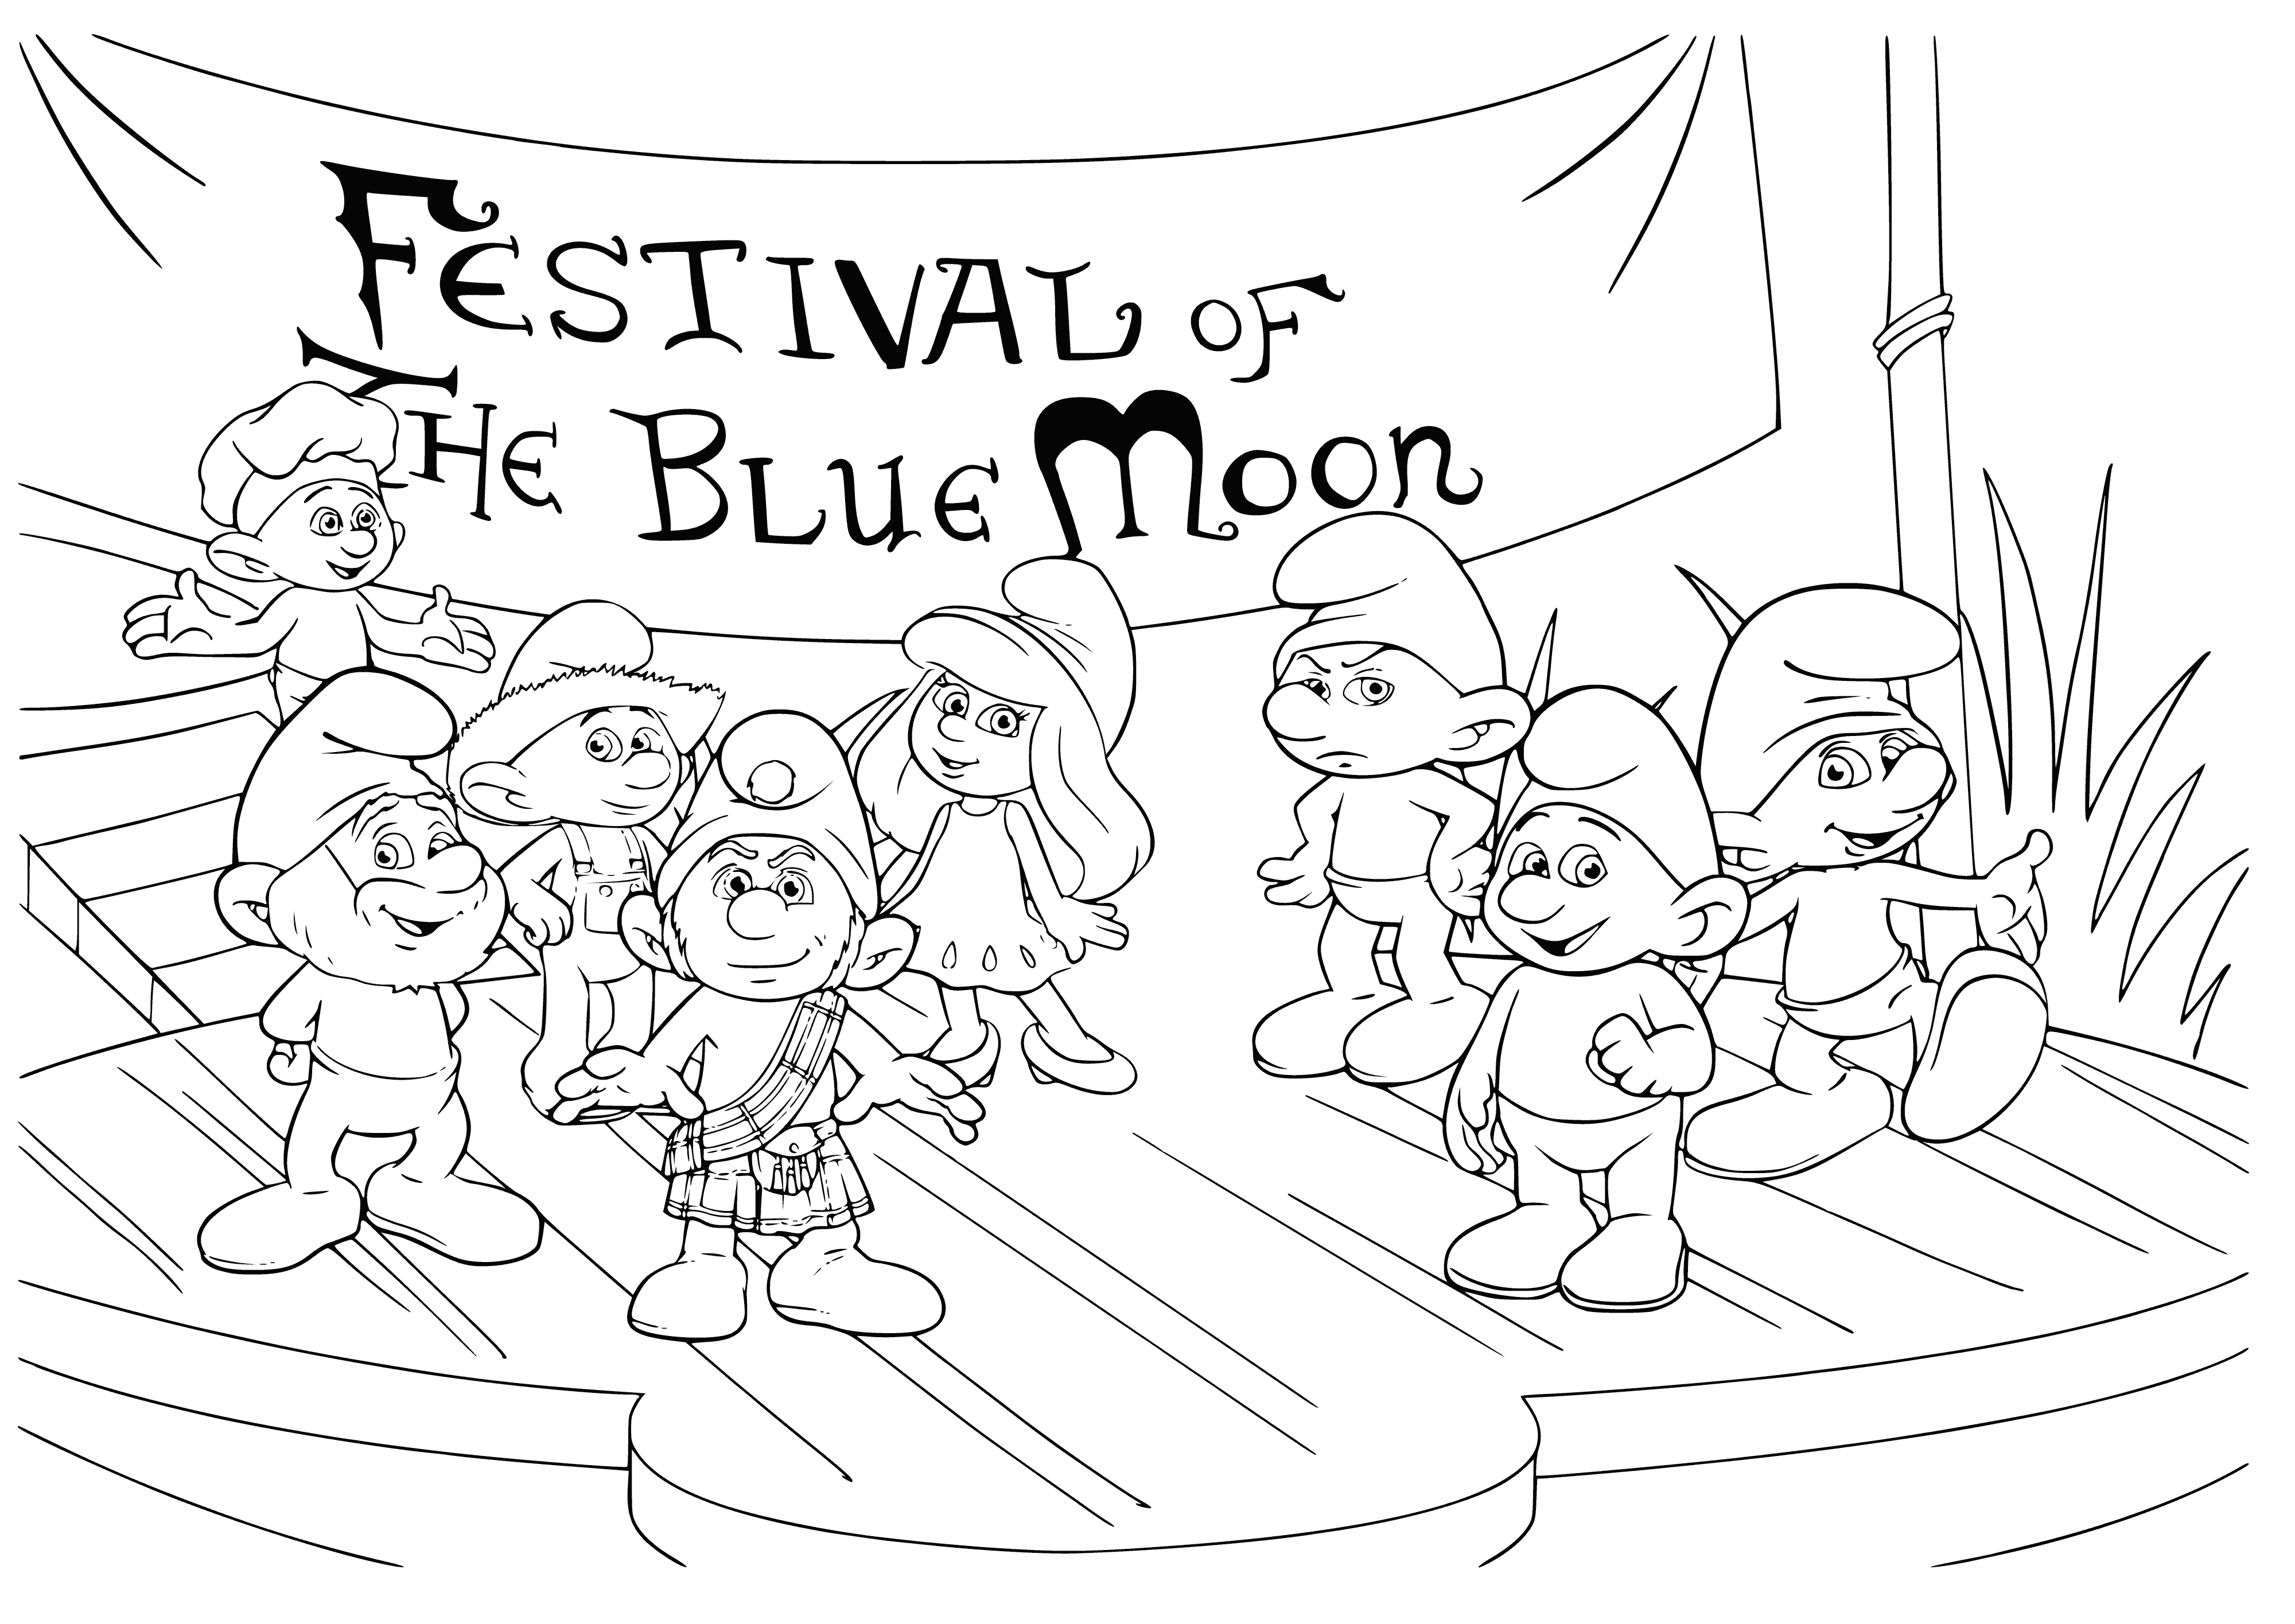 coloring page: Smurfs celebrate Blue Moon Festival wearing blue, some play music, others dance. #smurflife